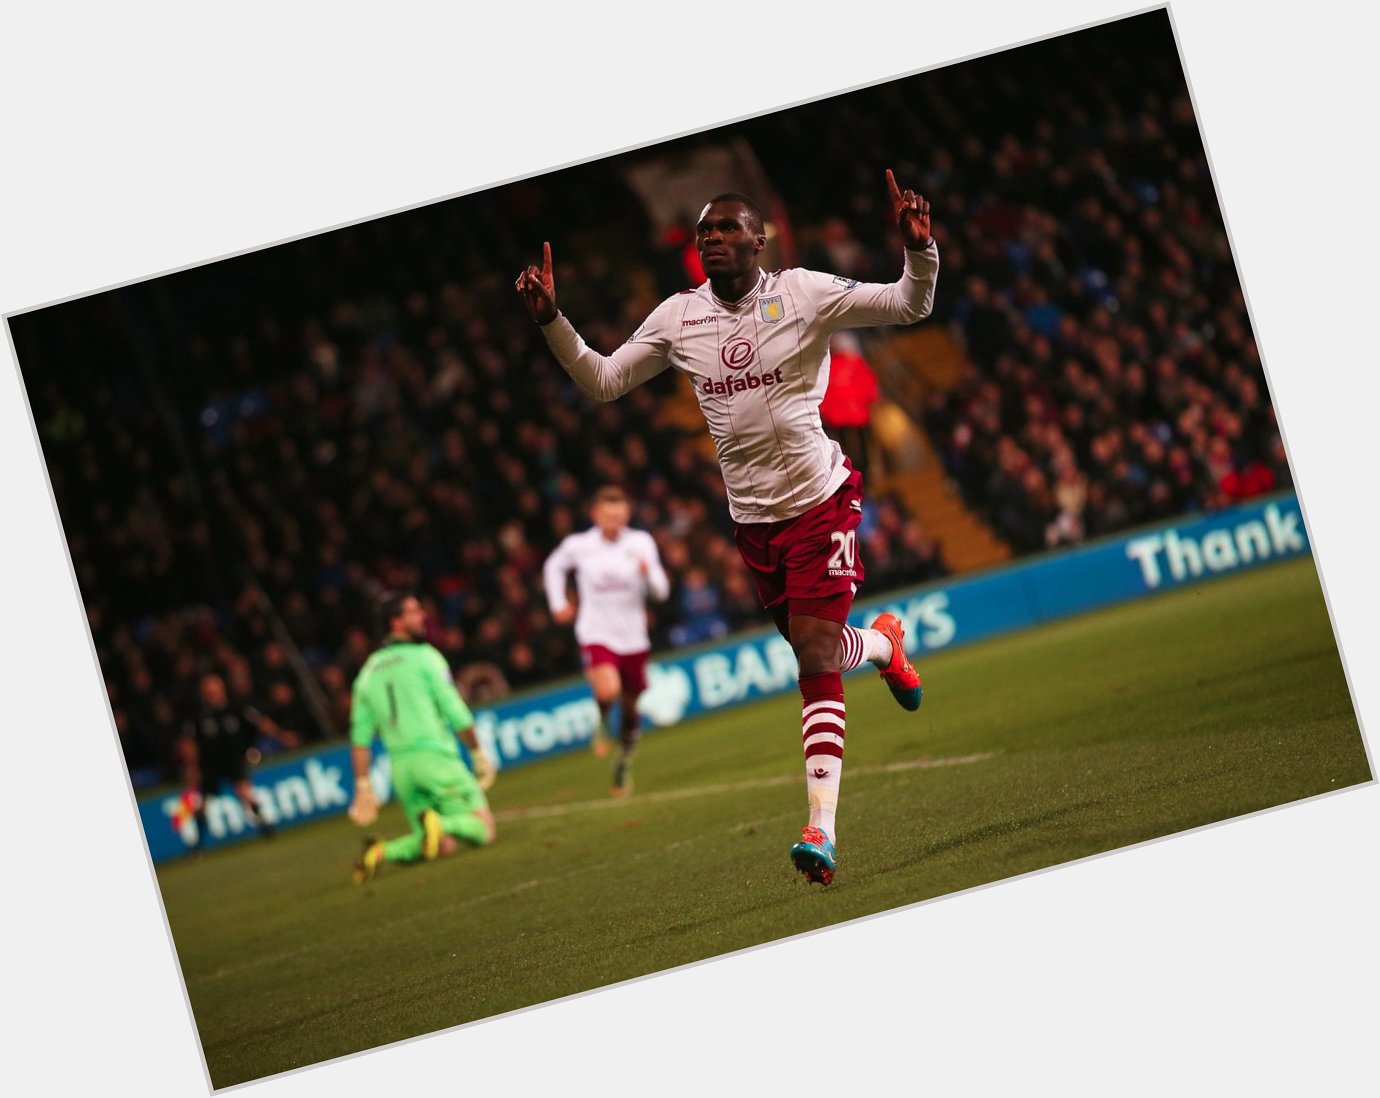 Happy 24th birthday to Christian Benteke. The striker has scored 30 goals in 65 games. 